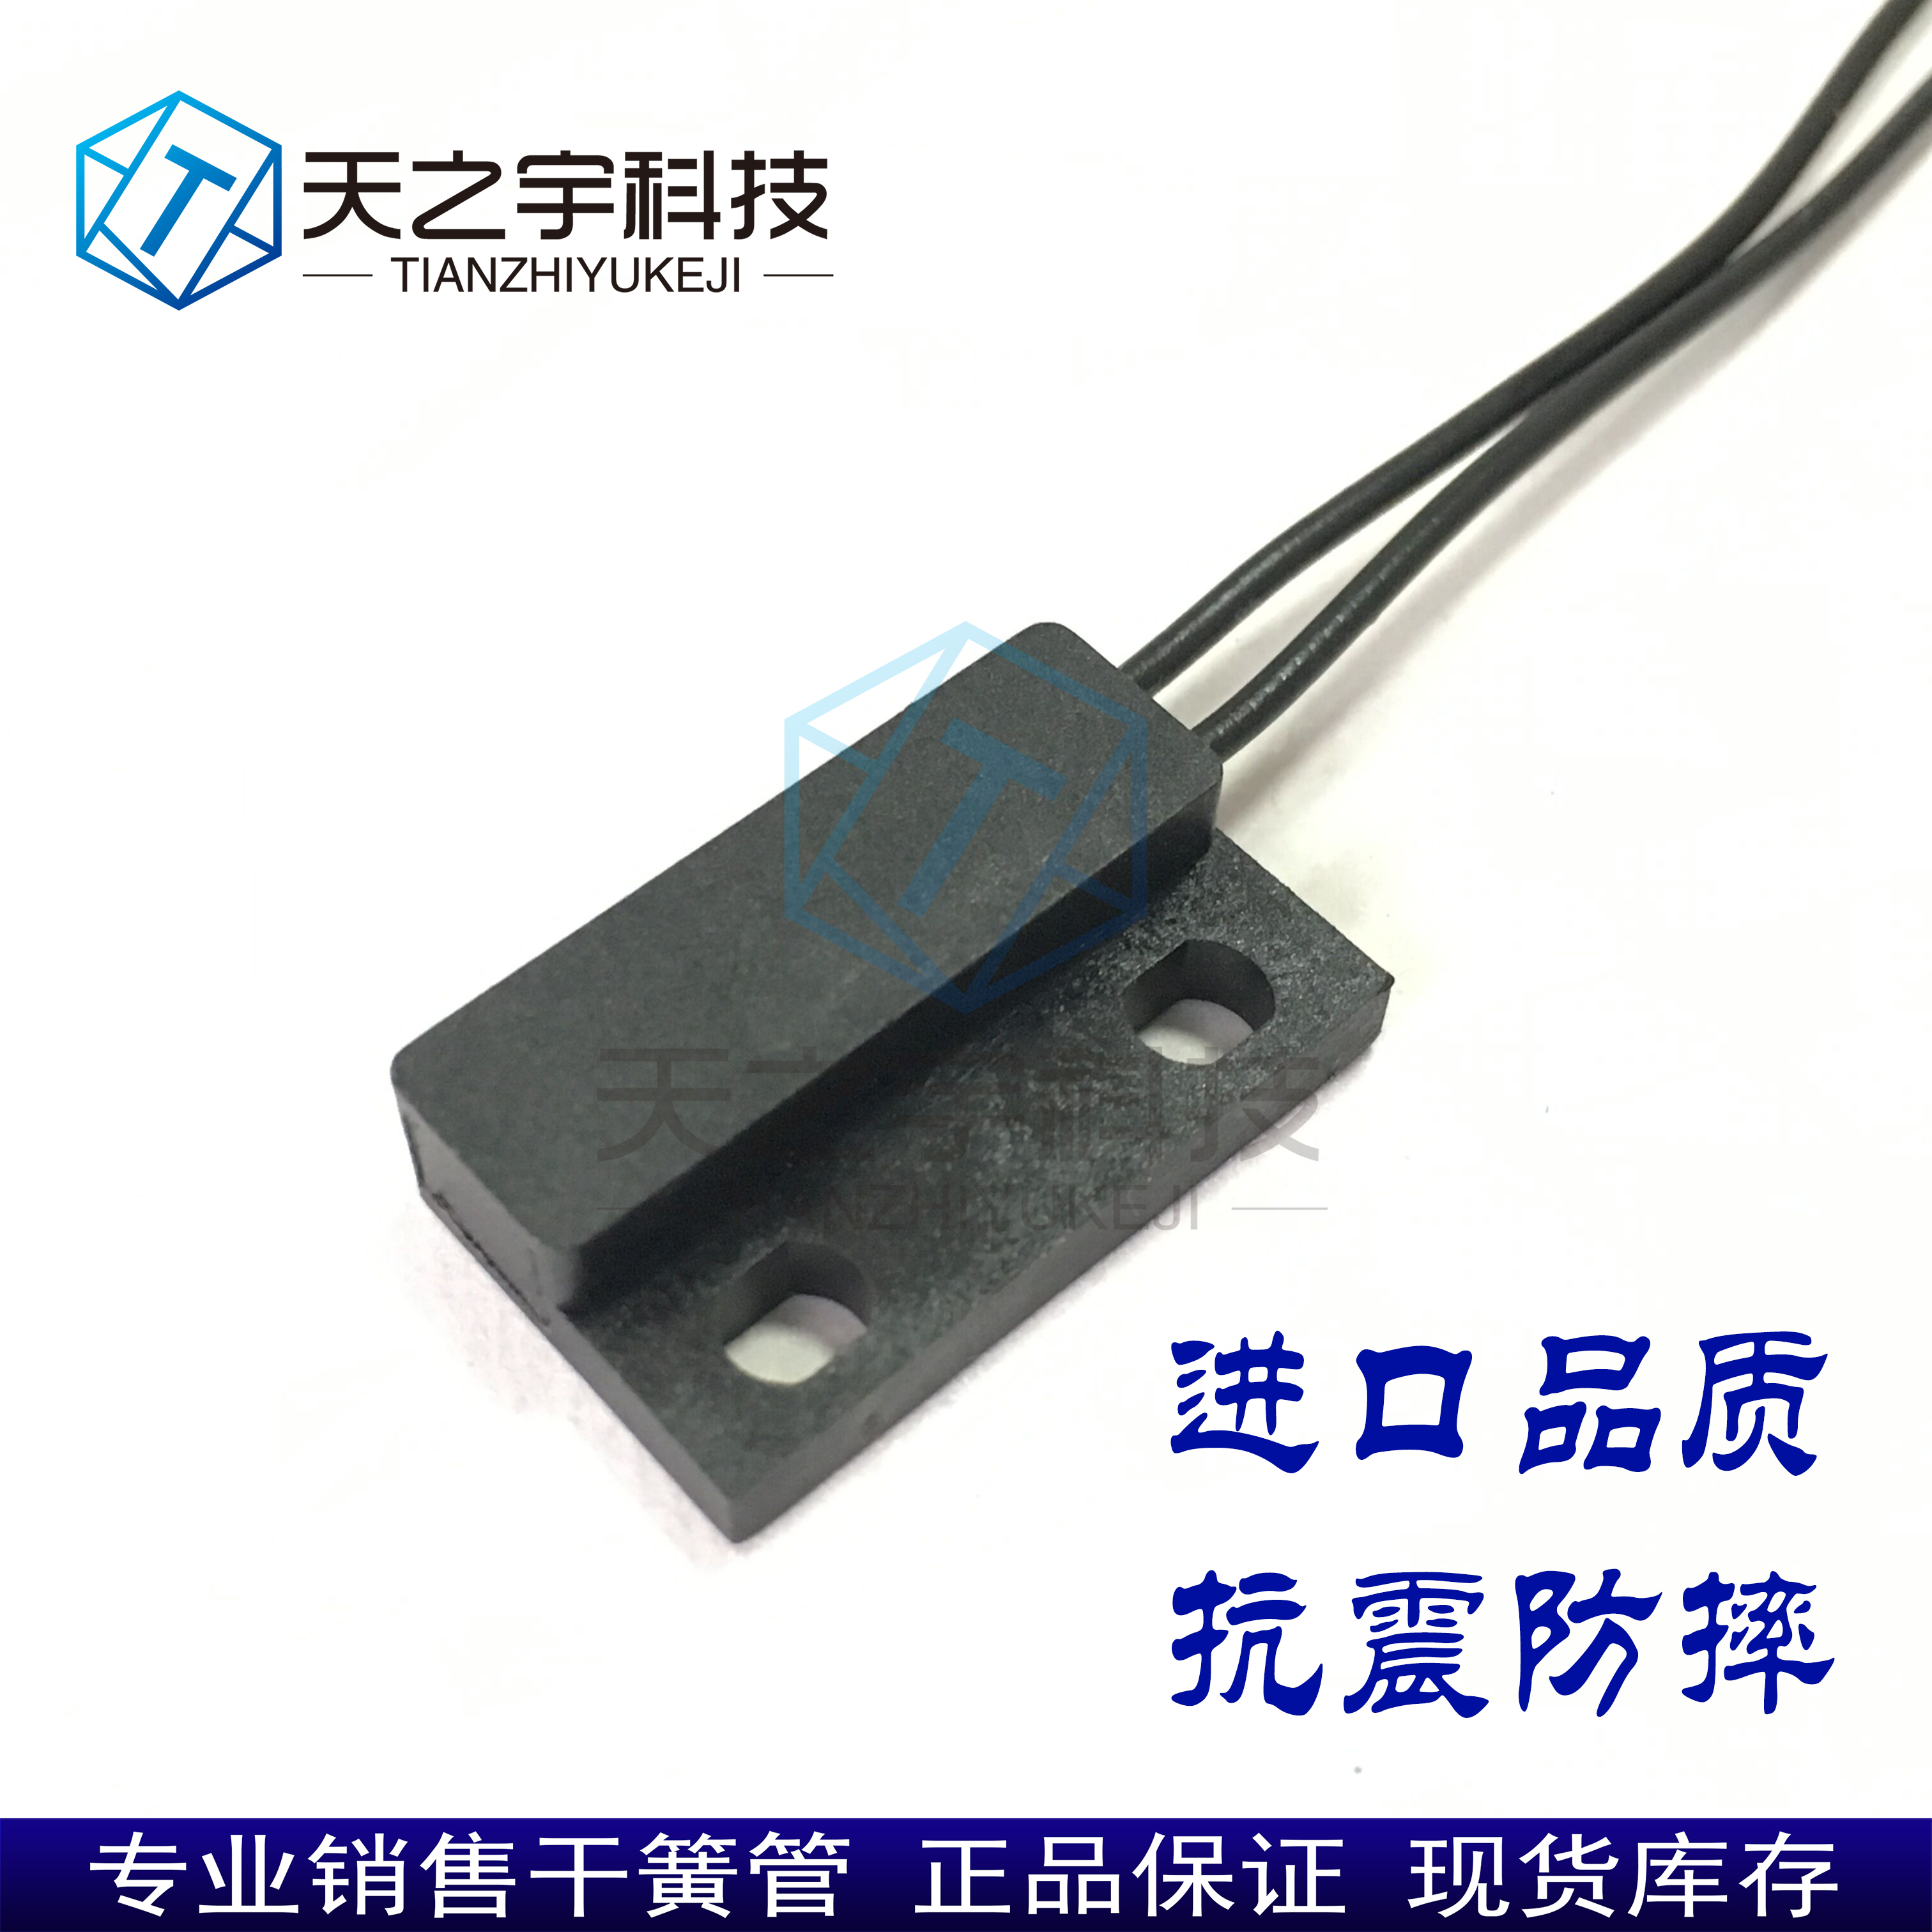 High quality GPS-23 everopen type everclosed type magnetic close to switch magnetic control switch plastic tube-Taobao